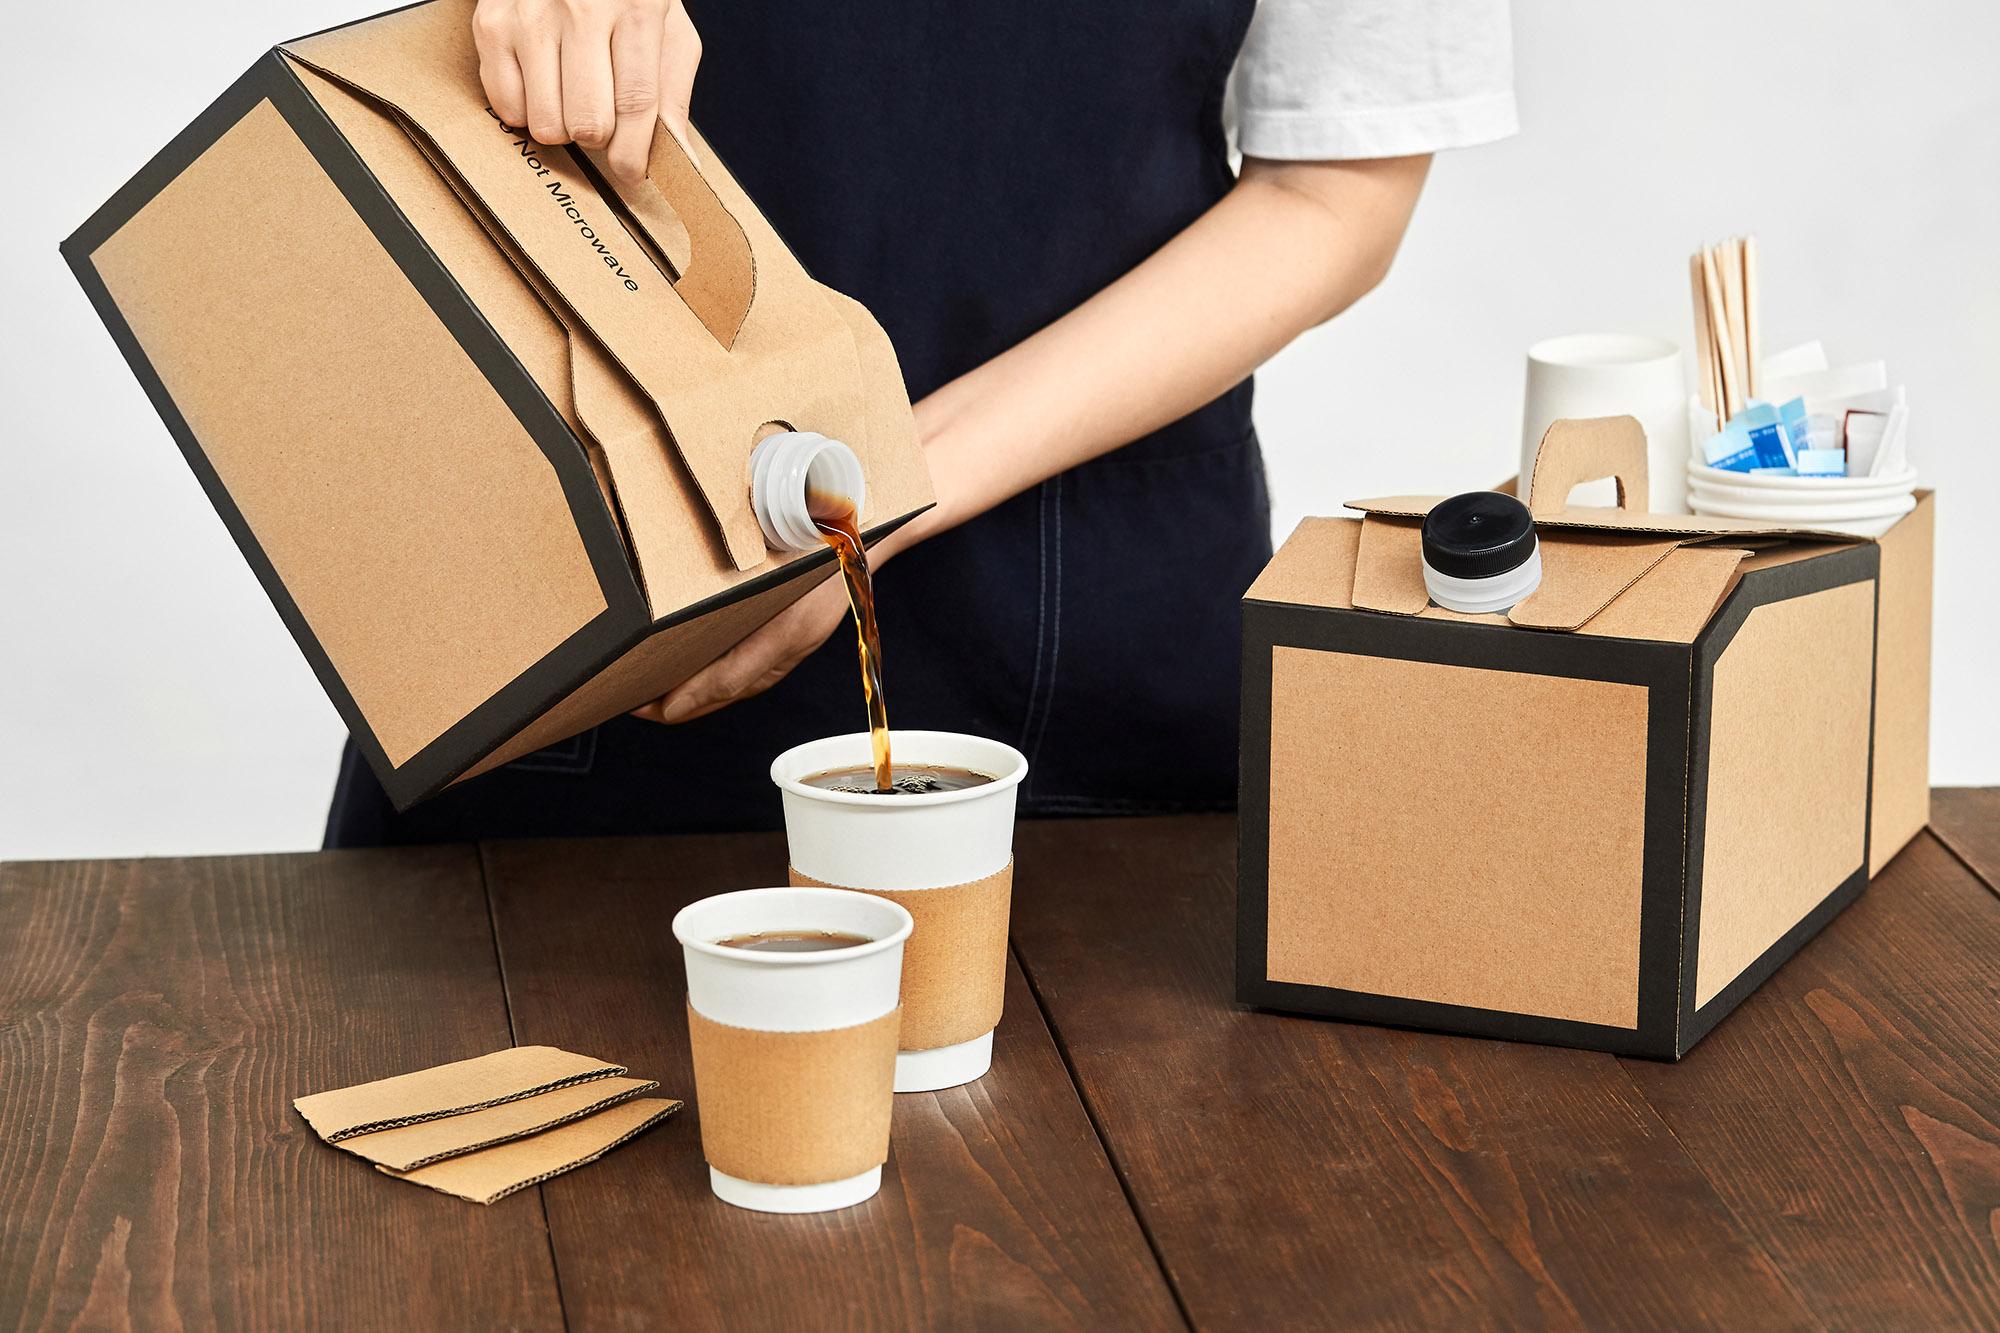 Hot Drink Sleeve & Beverage On The Move